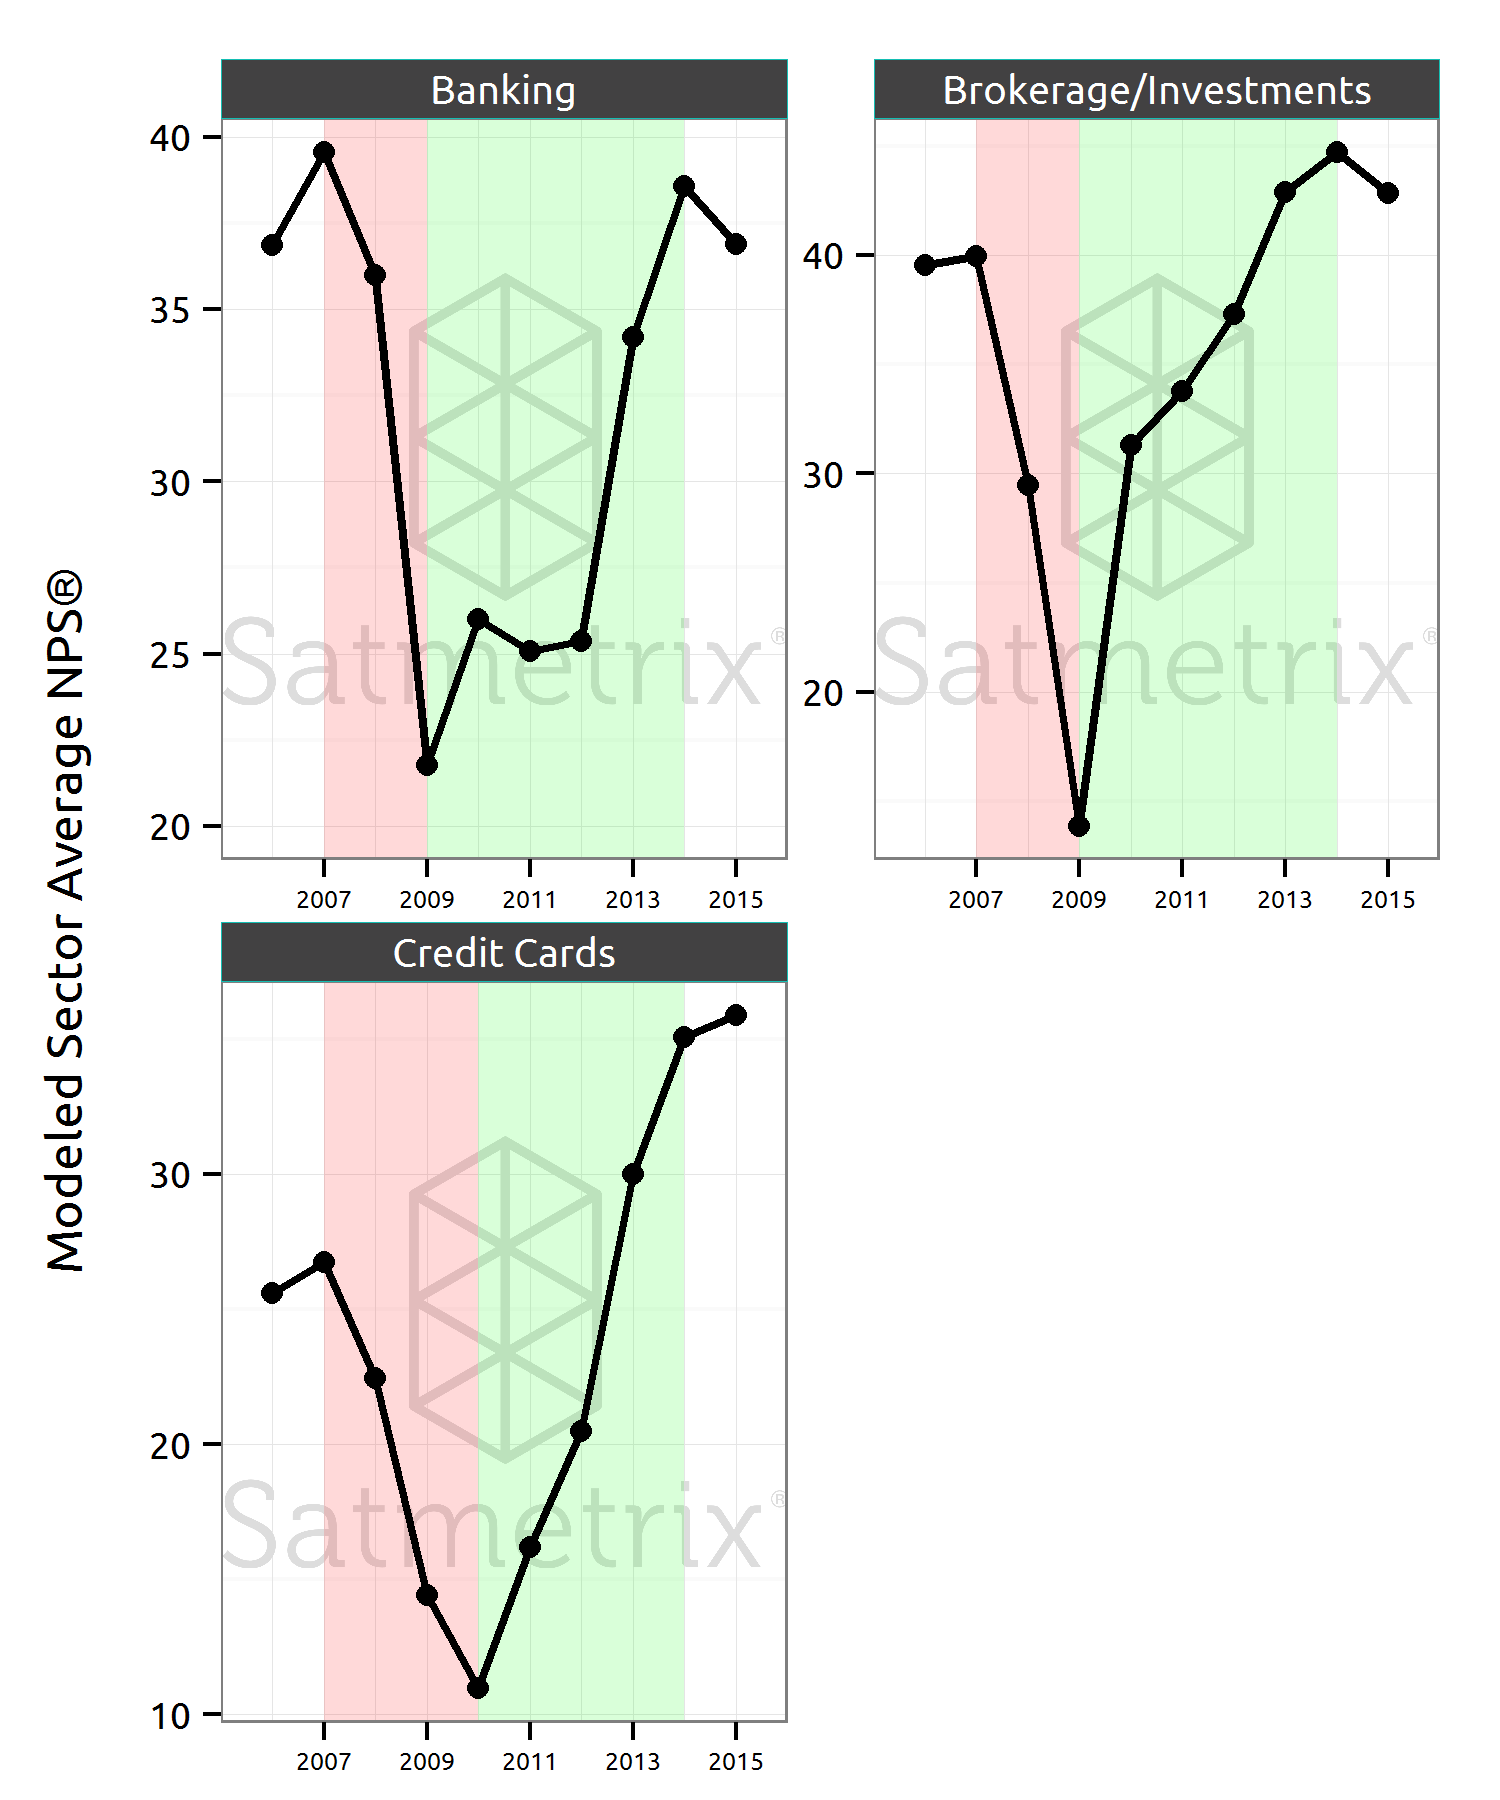 Modeled average NPS, 2006-2015, for the three financial services sectors in the Satmetrix US Consumer study. Periods of general decline are highlighted in red; periods of general recovery in green.